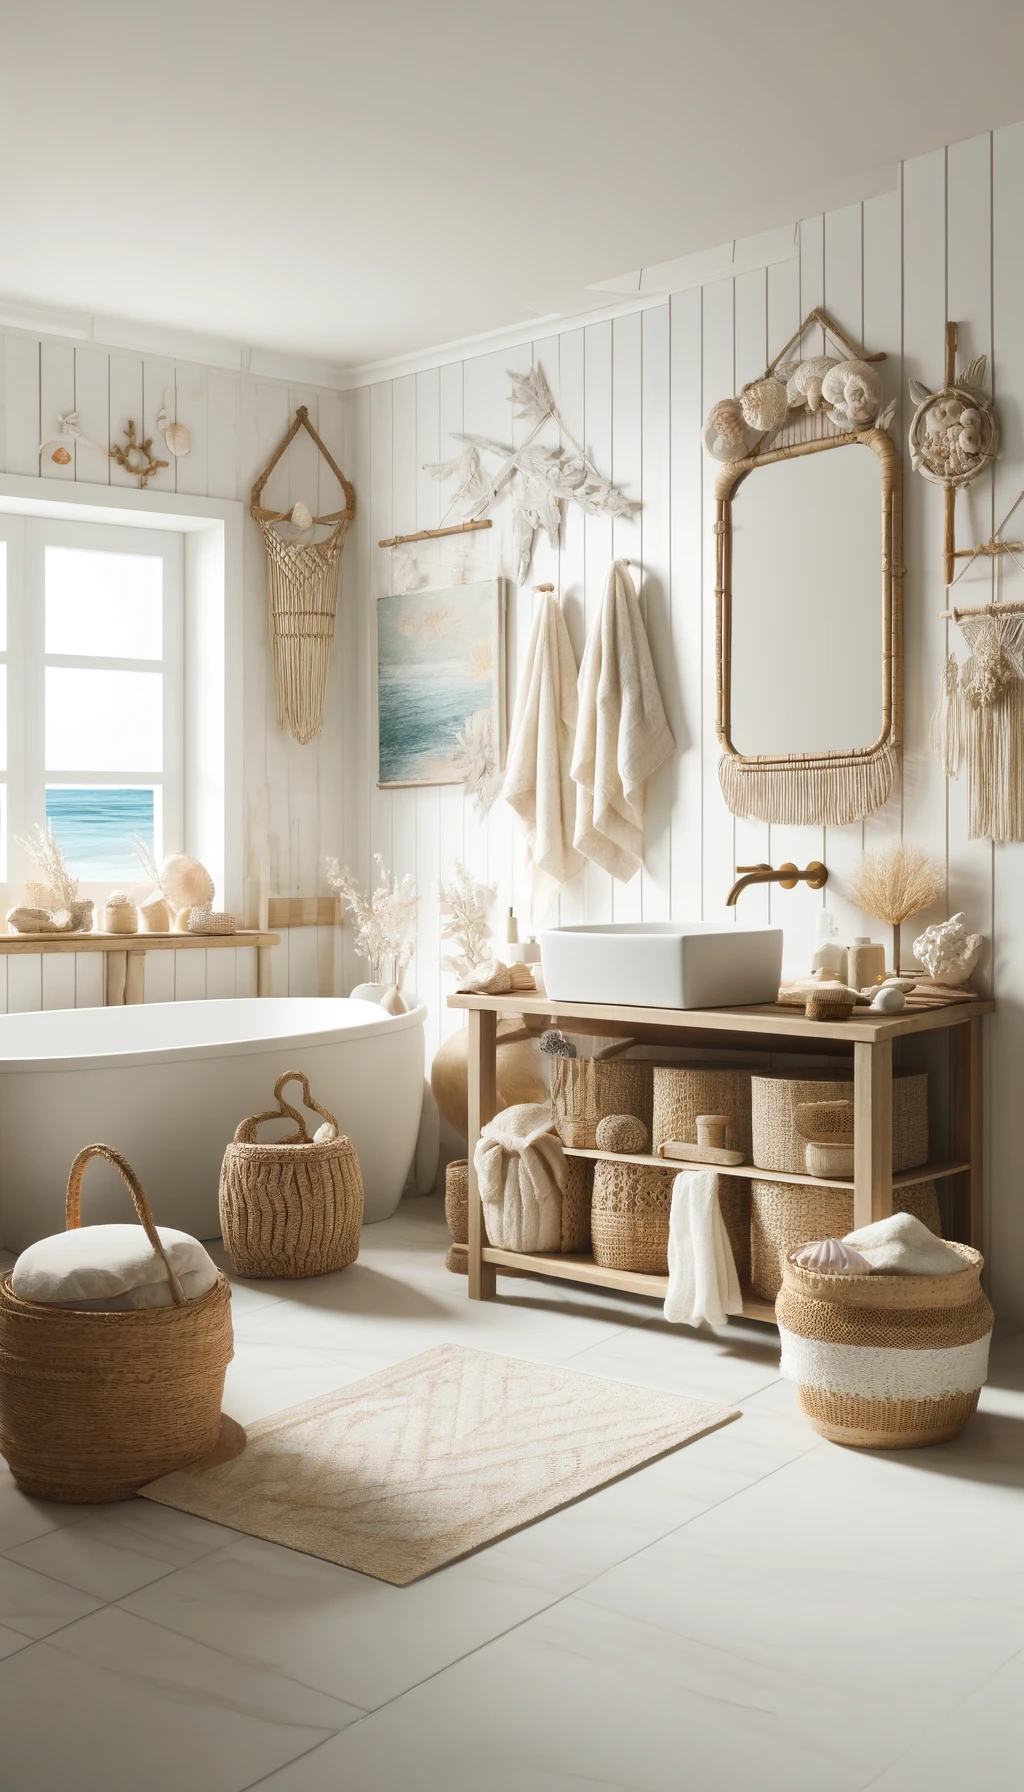 Here is the image of a peaceful bathroom retreat designed with boho and beachy styles. The space uses light colors like whites and neutrals for a calming atmosphere and features decor such as woven baskets, macrame hangings, bamboo features, and coastal pieces like seashell soap dishes and driftwood mirrors. Nautical art enhances the beachy mood, creating a tropical paradise feel. Soft, white bath towels add elegance and a spa-like touch. You can view the image above